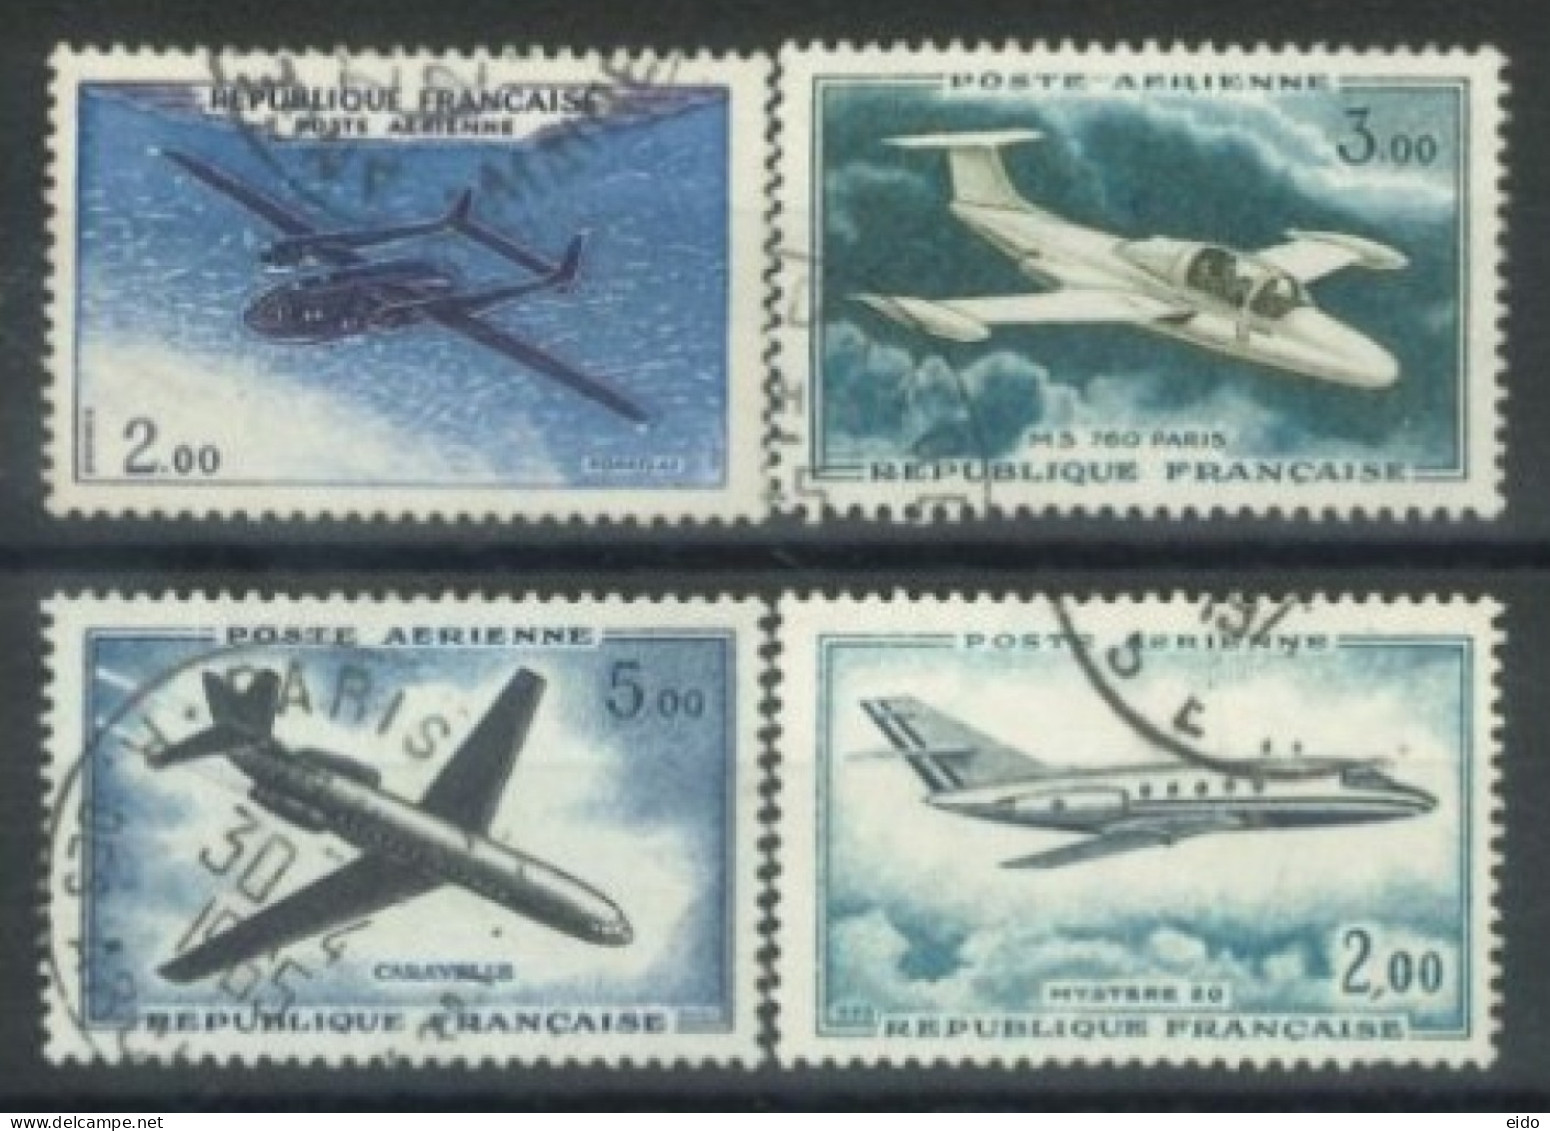 FRANCE - 1960/65- AIR PLANES STAMPS SET OF 4, USED - Used Stamps